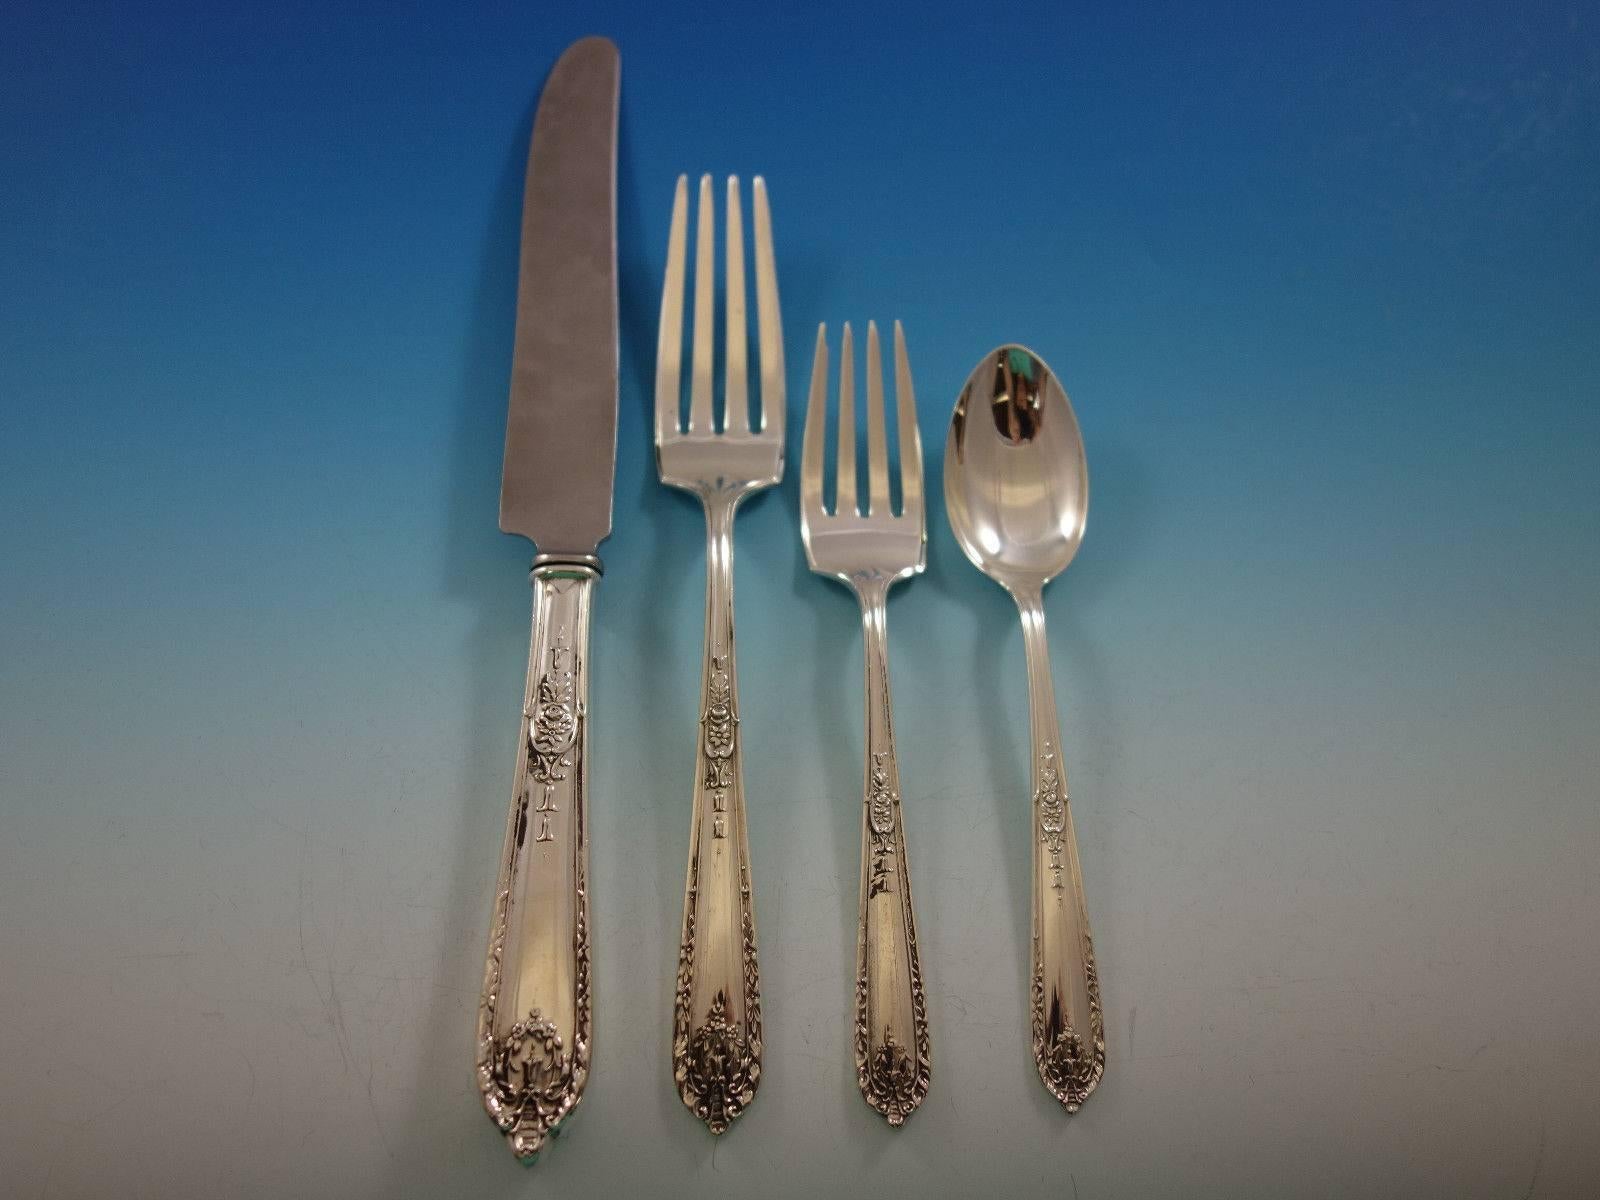 Della Robbia by Alvin sterling silver dinner size flatware set of 36 pieces. This set includes: 

Eight dinner size knives, 9 3/4